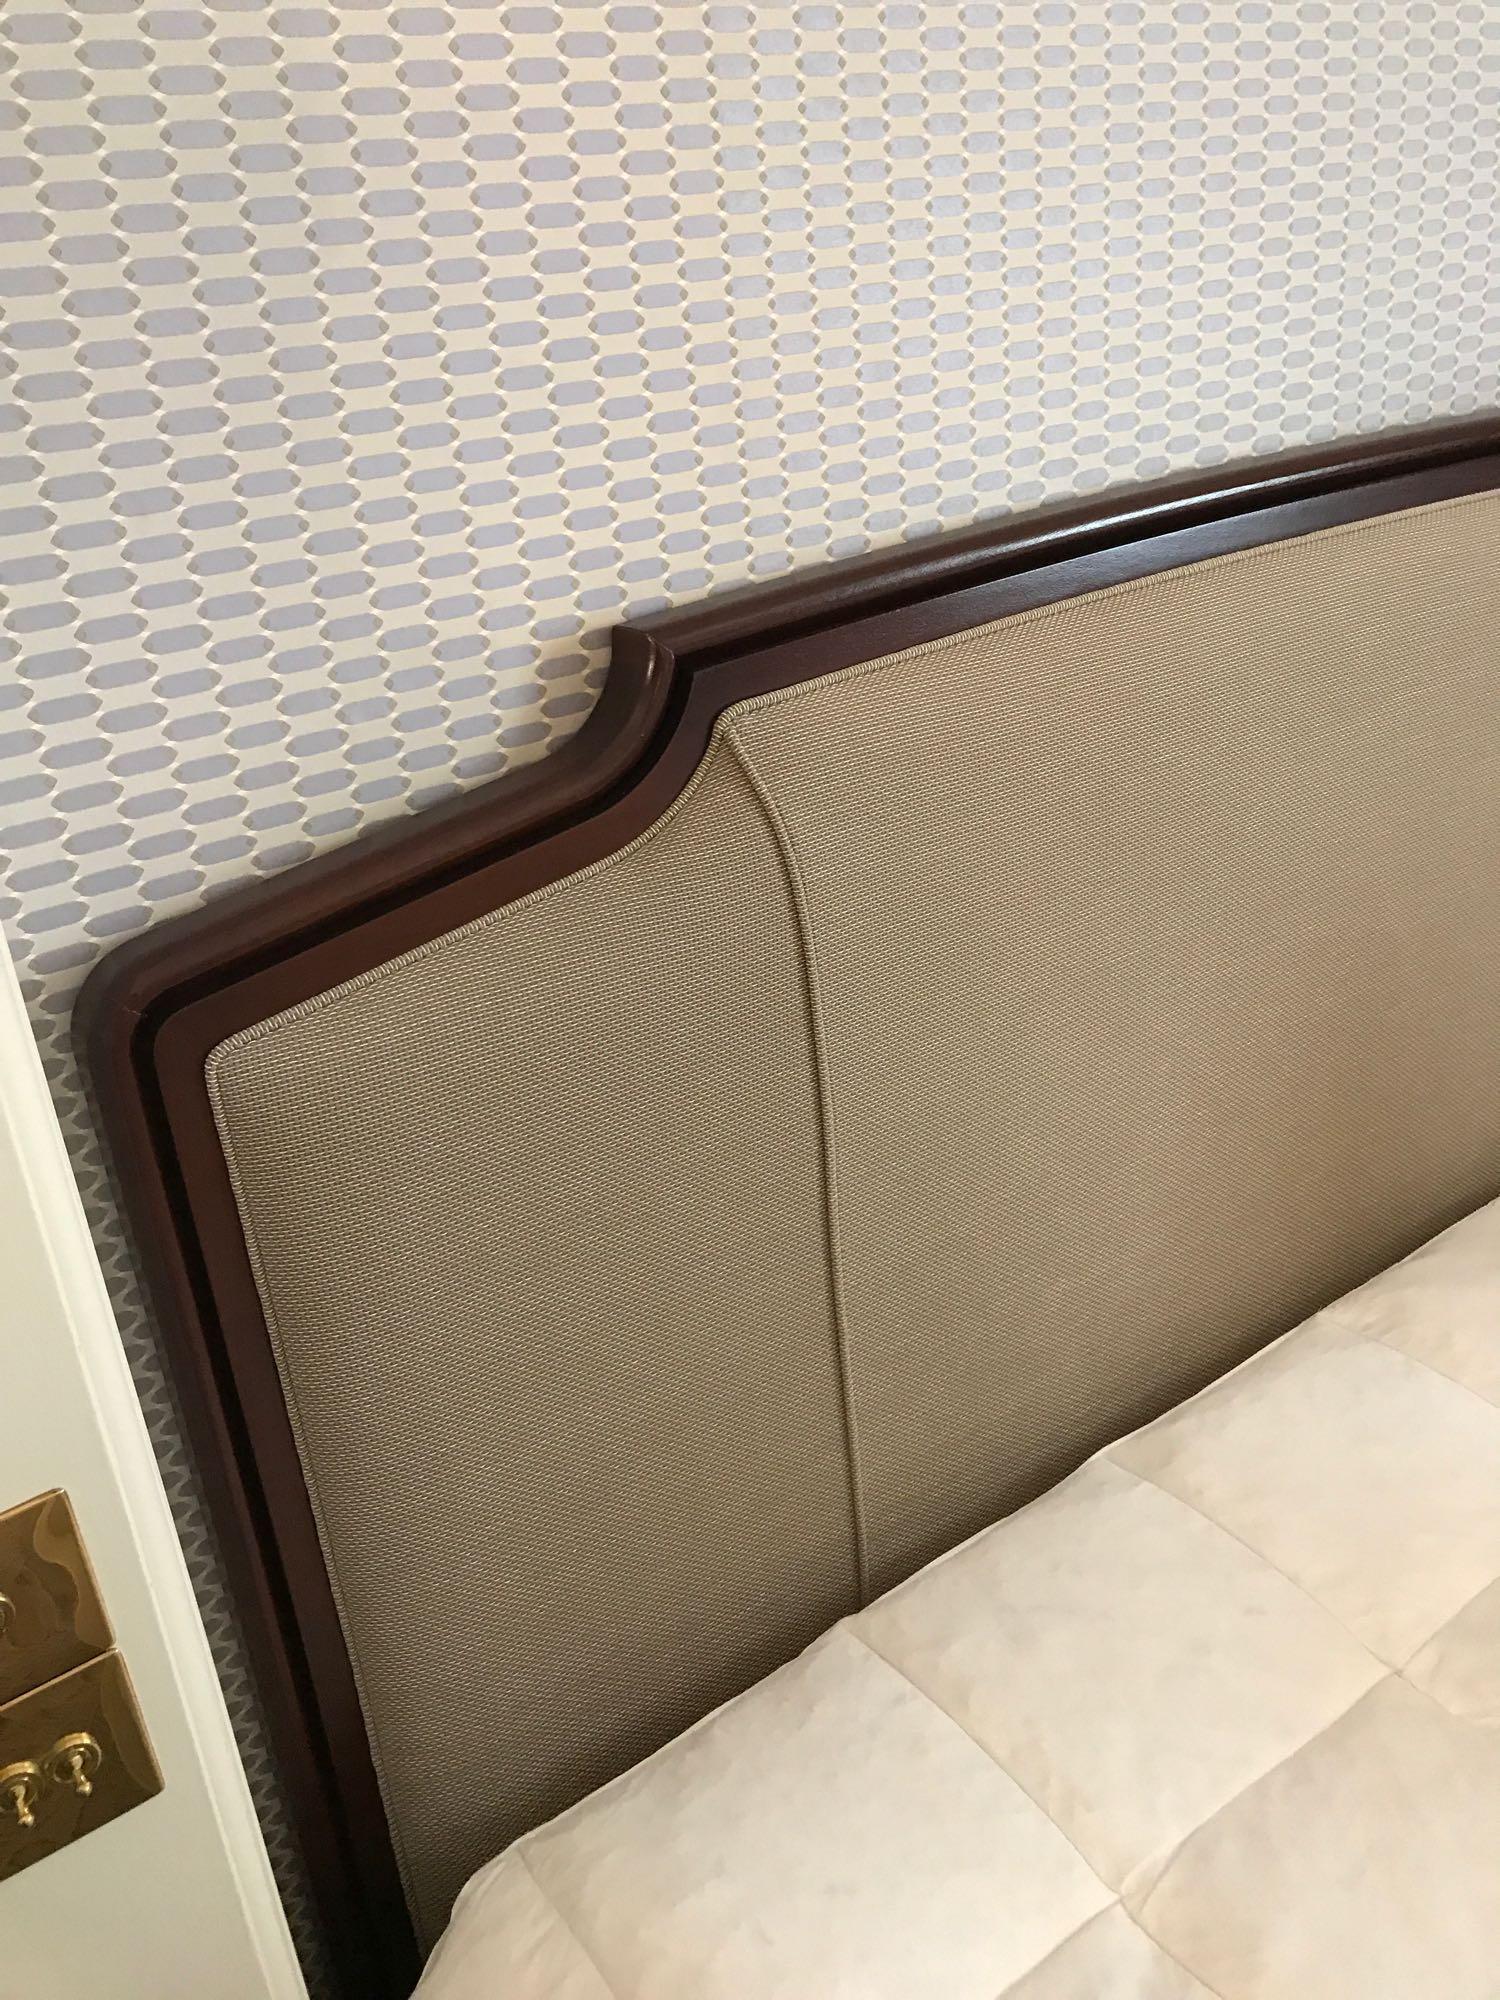 Headboard, Handcrafted With Nail Trim And Padded Textured Woven Upholstery (Room 422) - Image 3 of 3